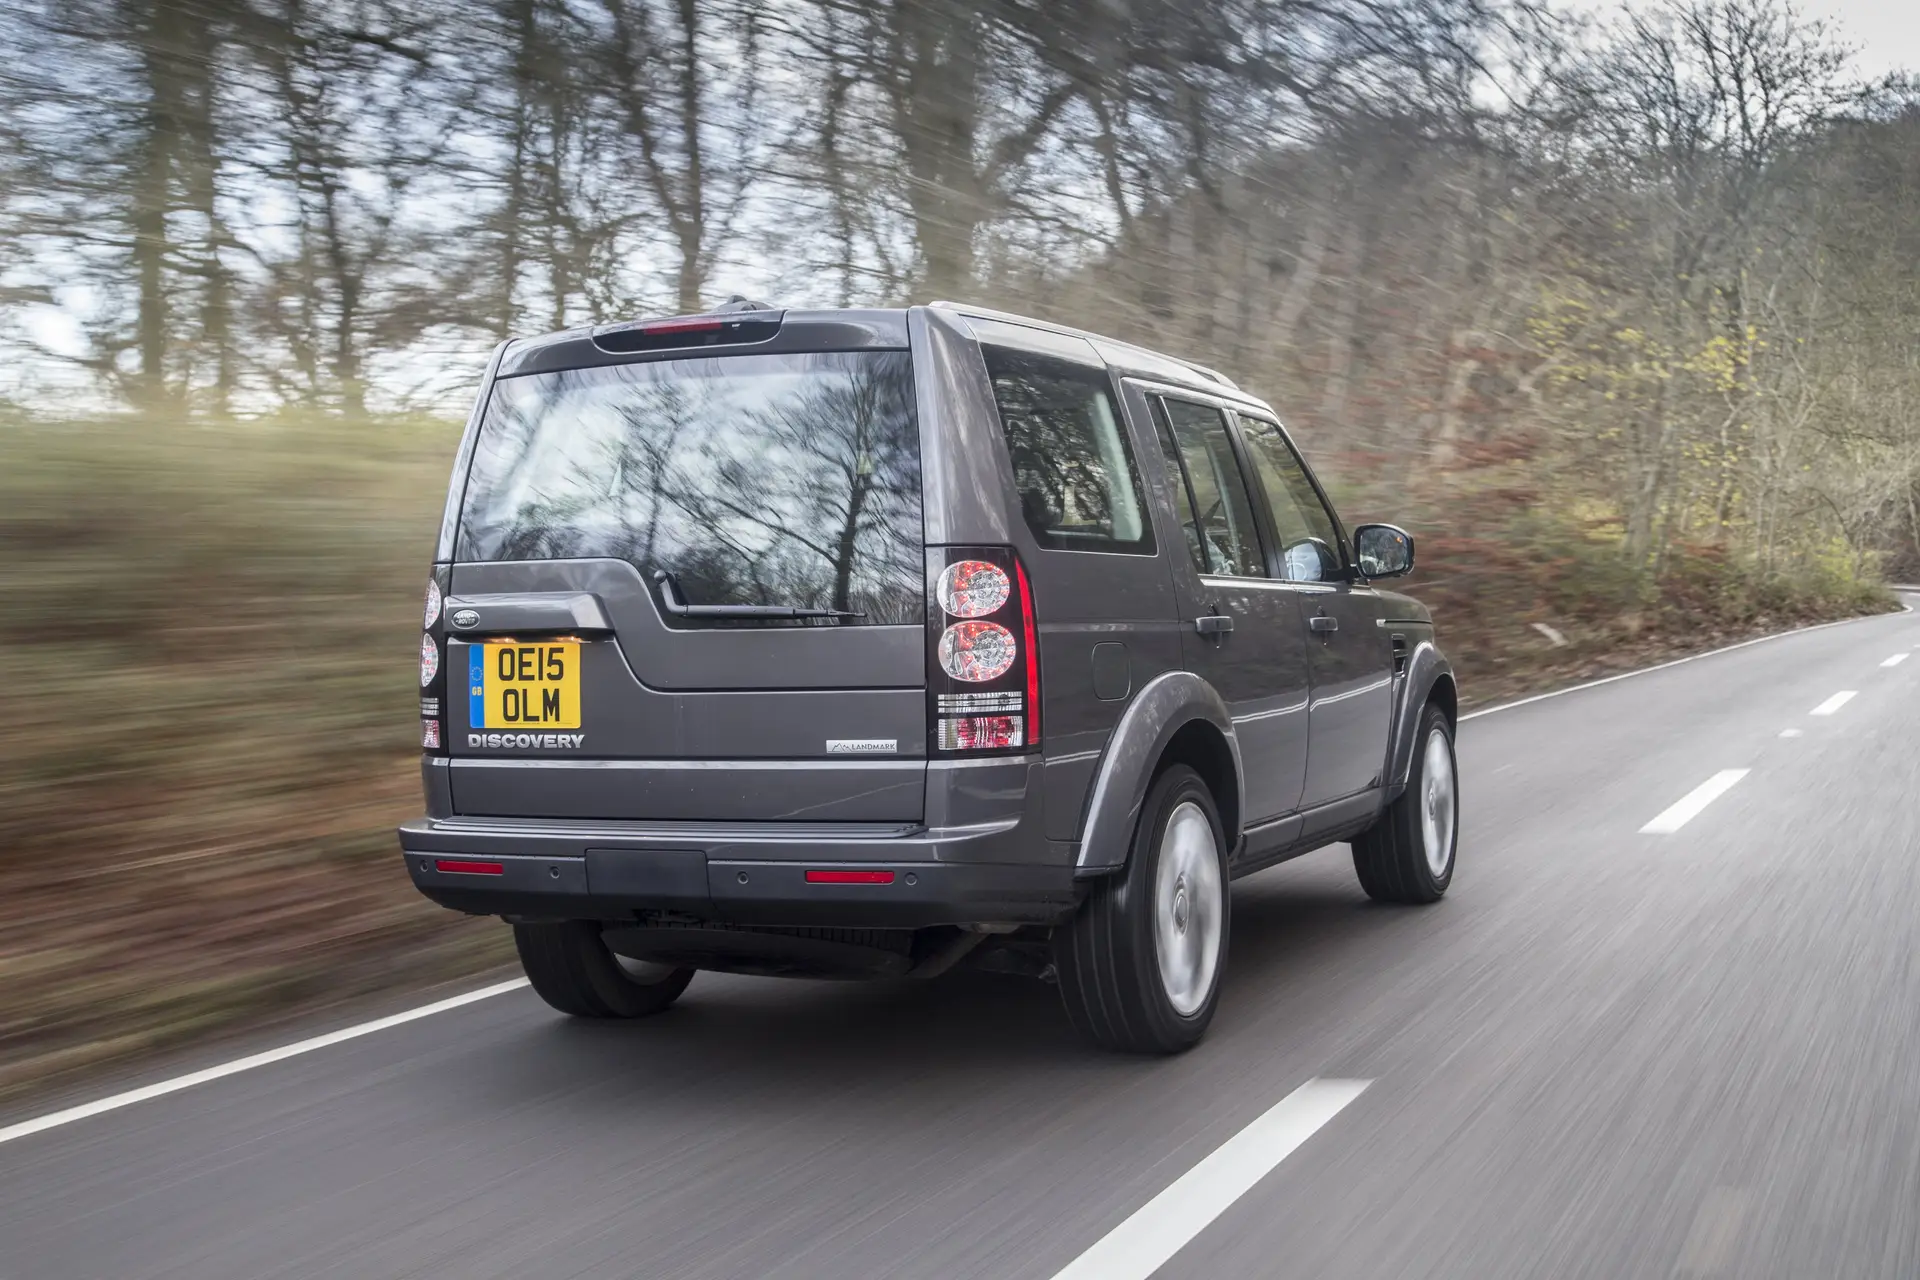 Land Rover Discovery 4 (2009-2017) Review: Exterior rear three quarter photo of the Land Rover Discovery 4 on the road